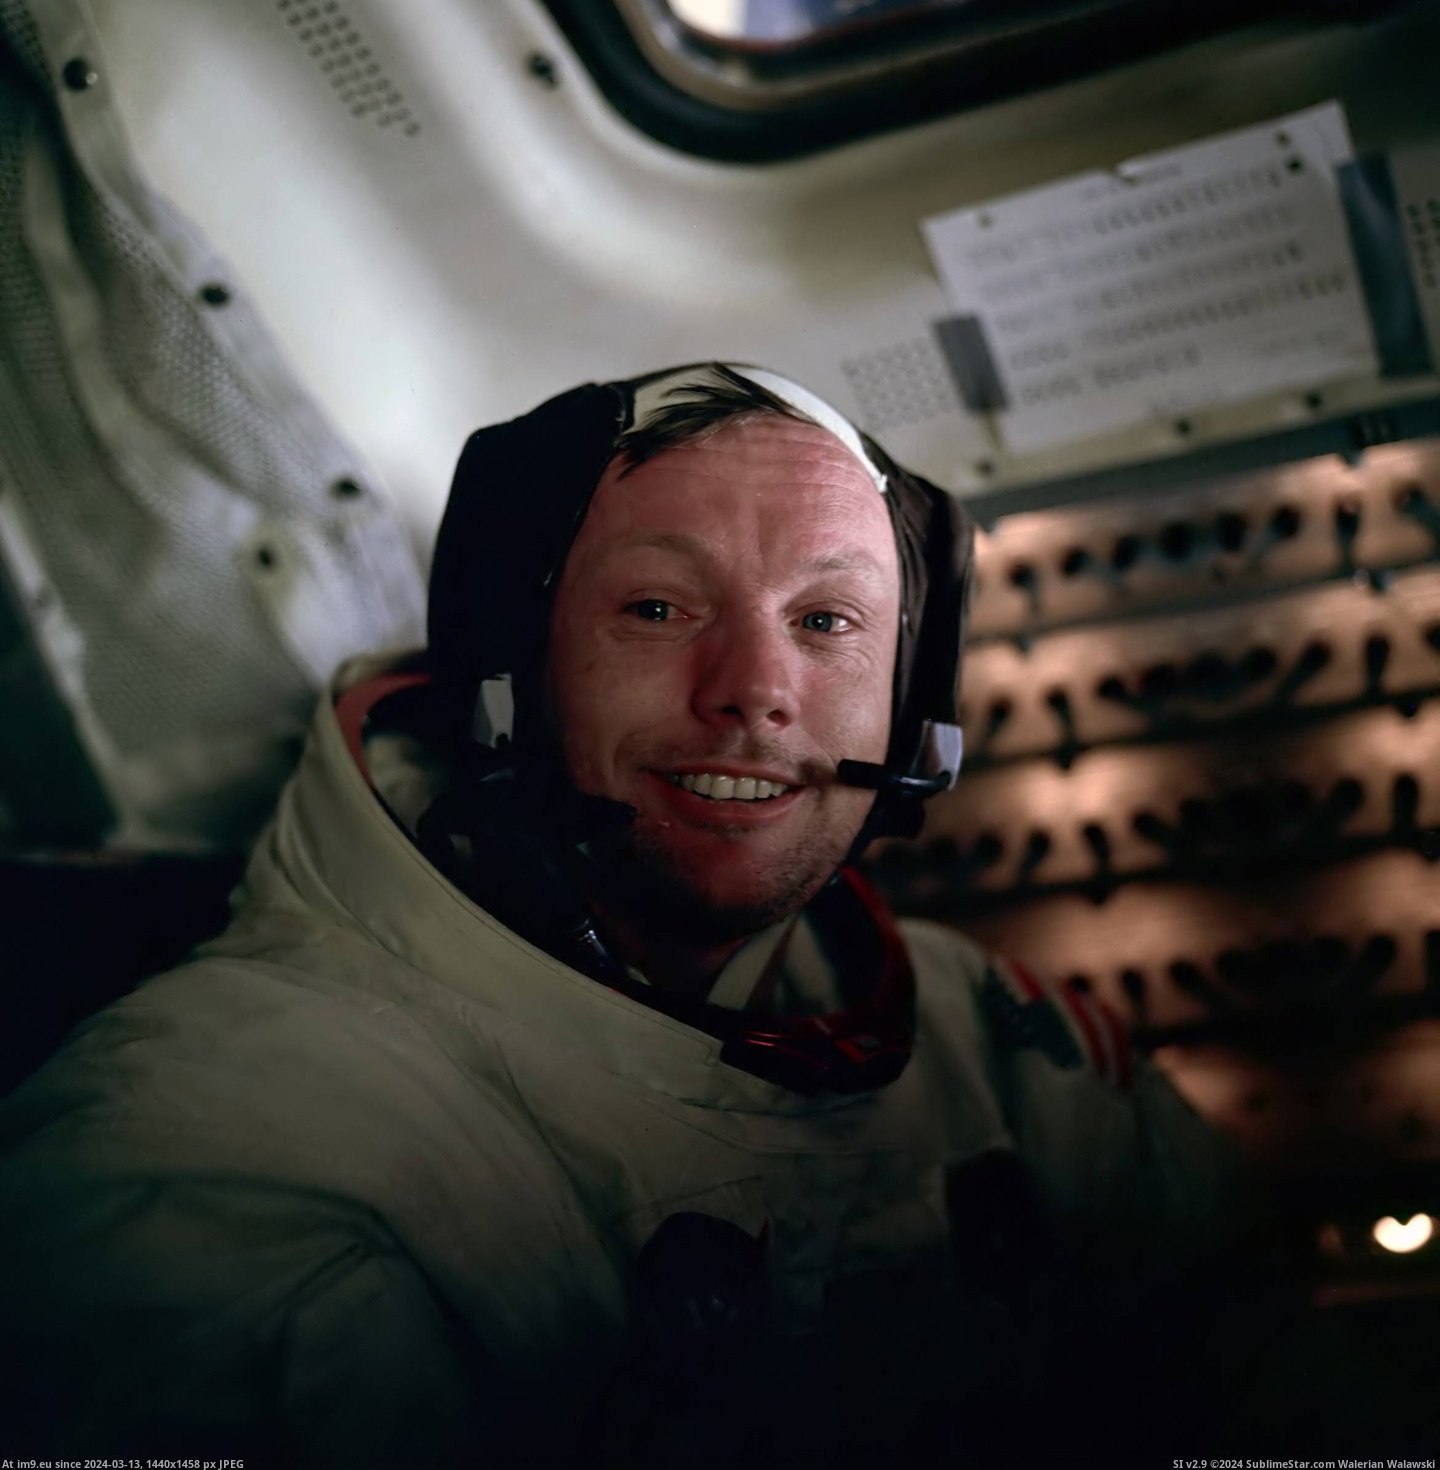 #Foot #Person #Step #Moments #Aldrin #Armstrong #Teary #Photographed #Eyed #Buzz #Neil [Pics] A teary-eyed Neil Armstrong photographed by Buzz Aldrin just moments after being the first person to ever step foot on th Pic. (Изображение из альбом My r/PICS favs))